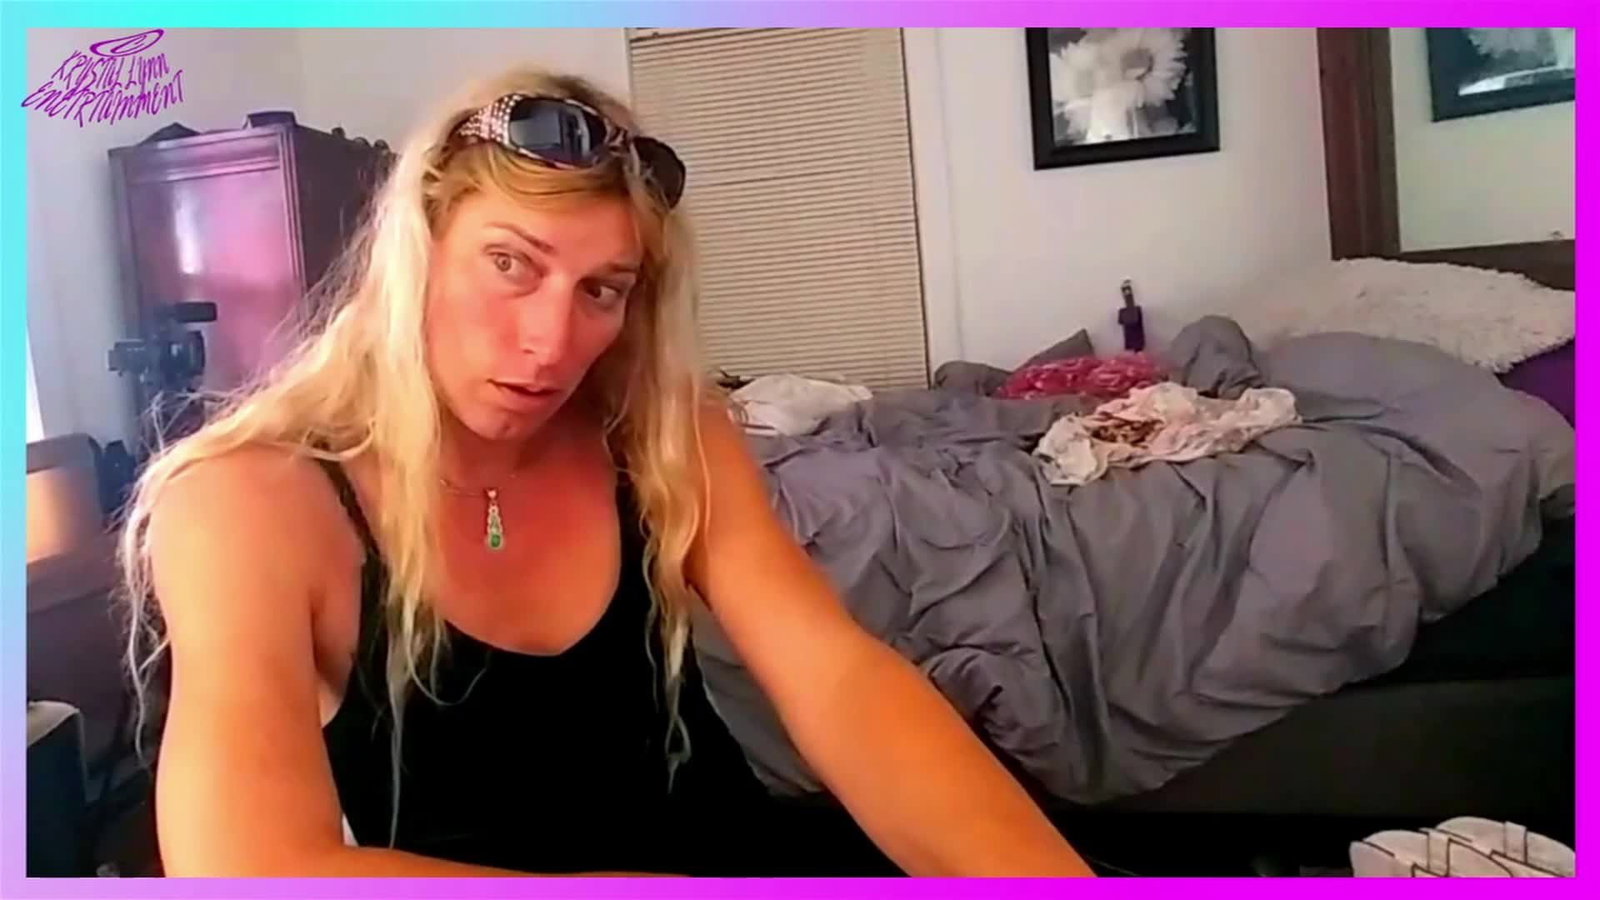 Video post by Trans Girl